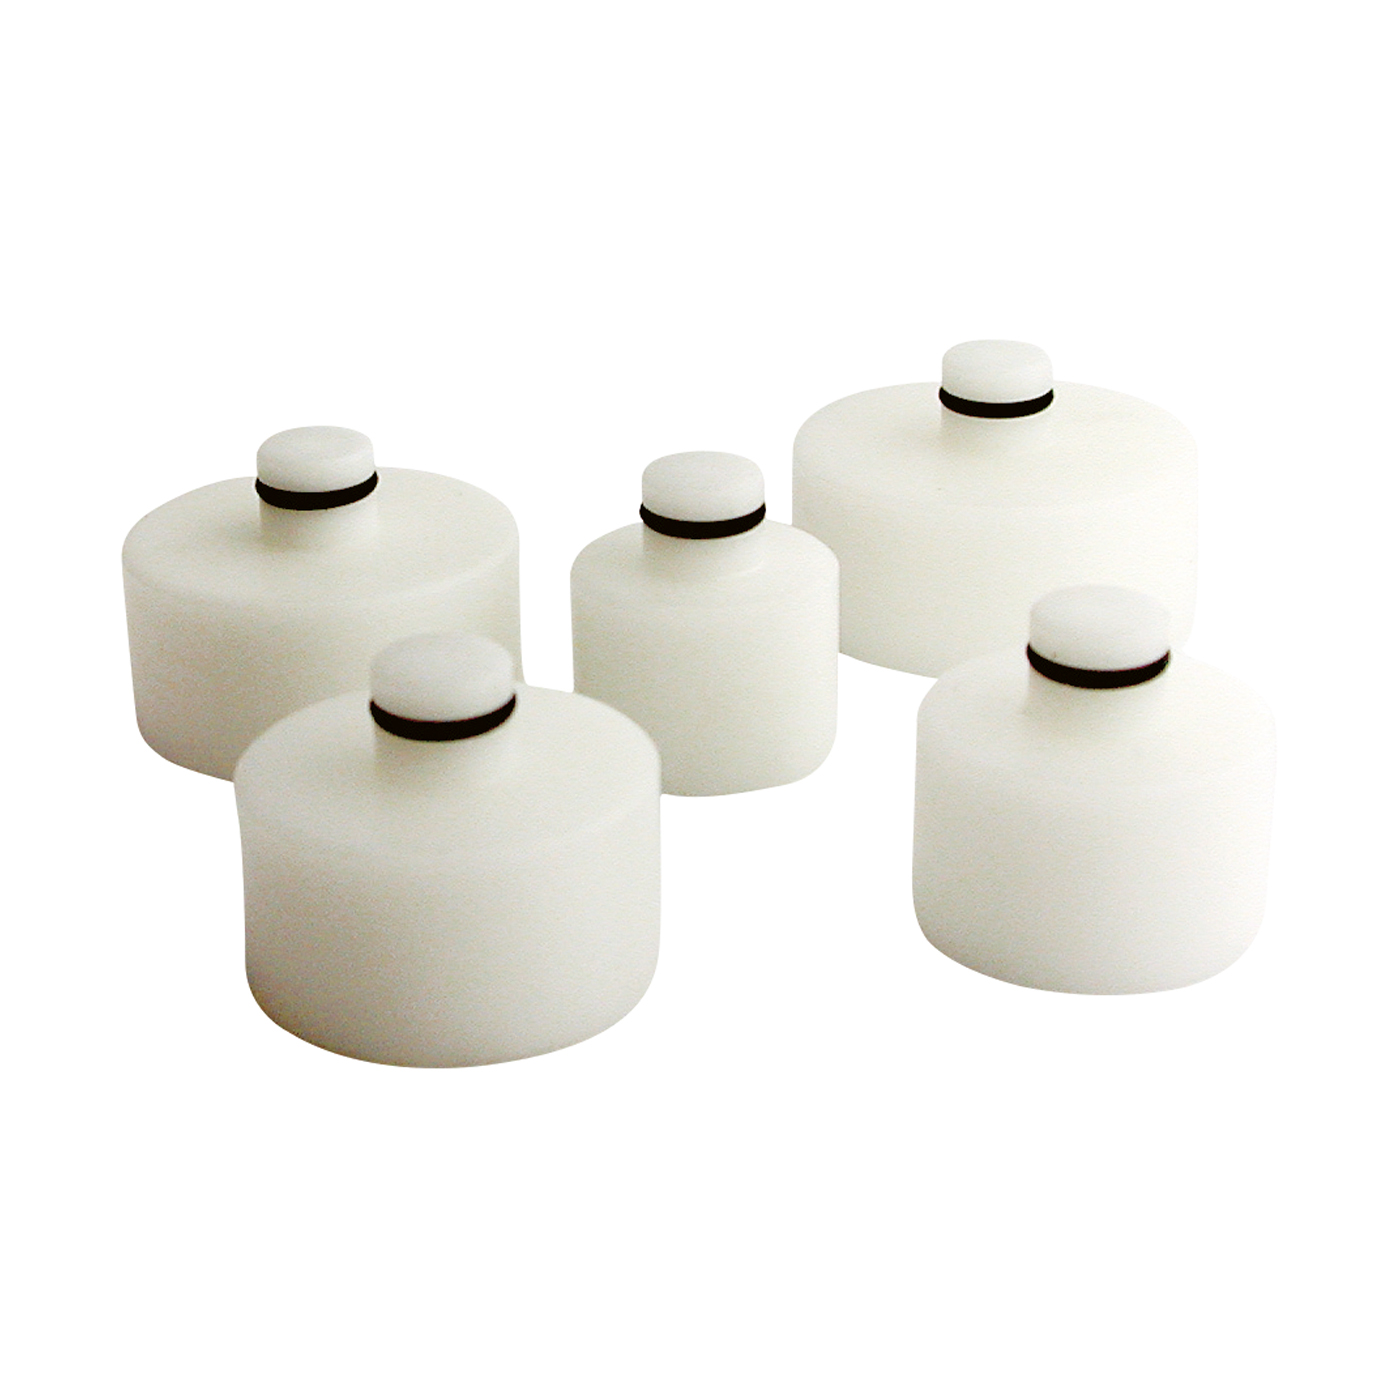 Timoklick Delrin Plungers - 1 assortment